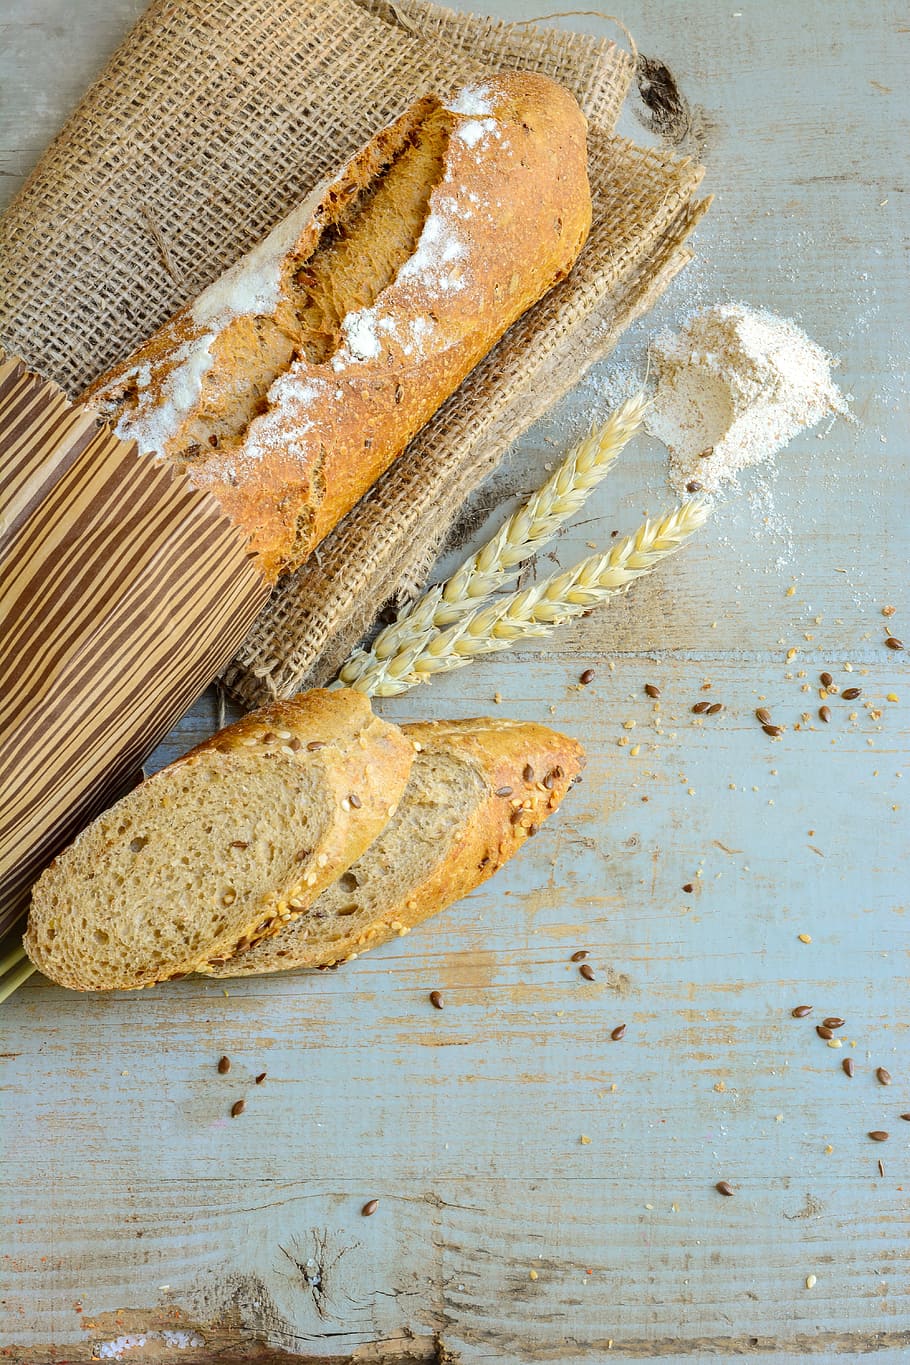 sliced, french, bread, table, artisan, food, paper, rustic, whole wheat, warm